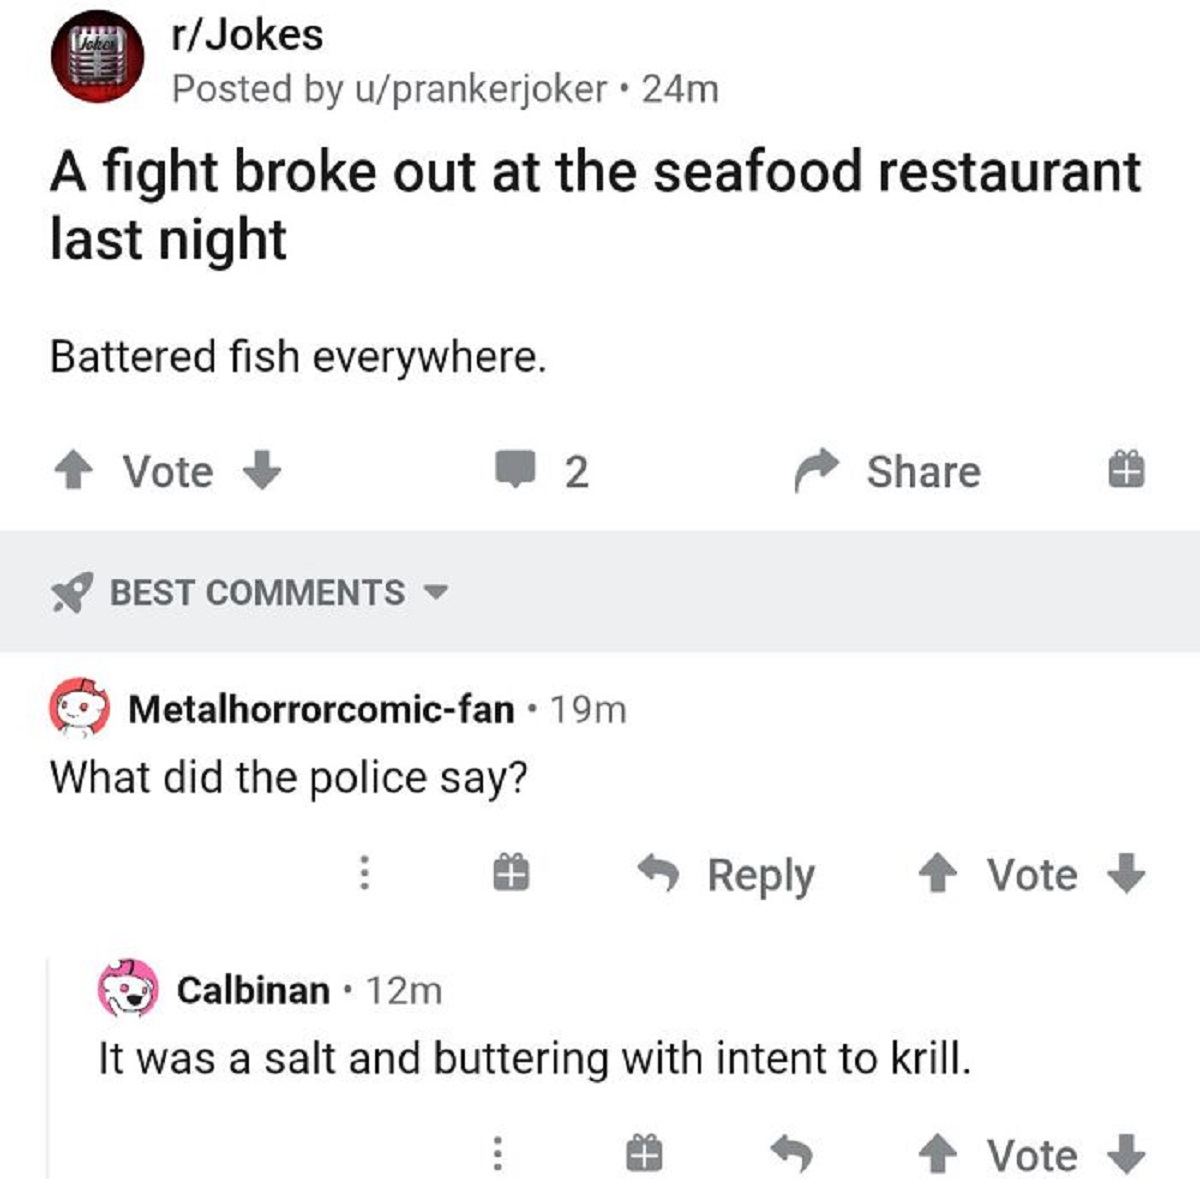 funny replies better than the original - document - CrJokes Posted by uprankerjoker 24m A fight broke out at the seafood restaurant last night Battered fish everywhere. Vote Best Metalhorrorcomicfan 19m What did the police say? 2 Calbinan 12m It was a sal